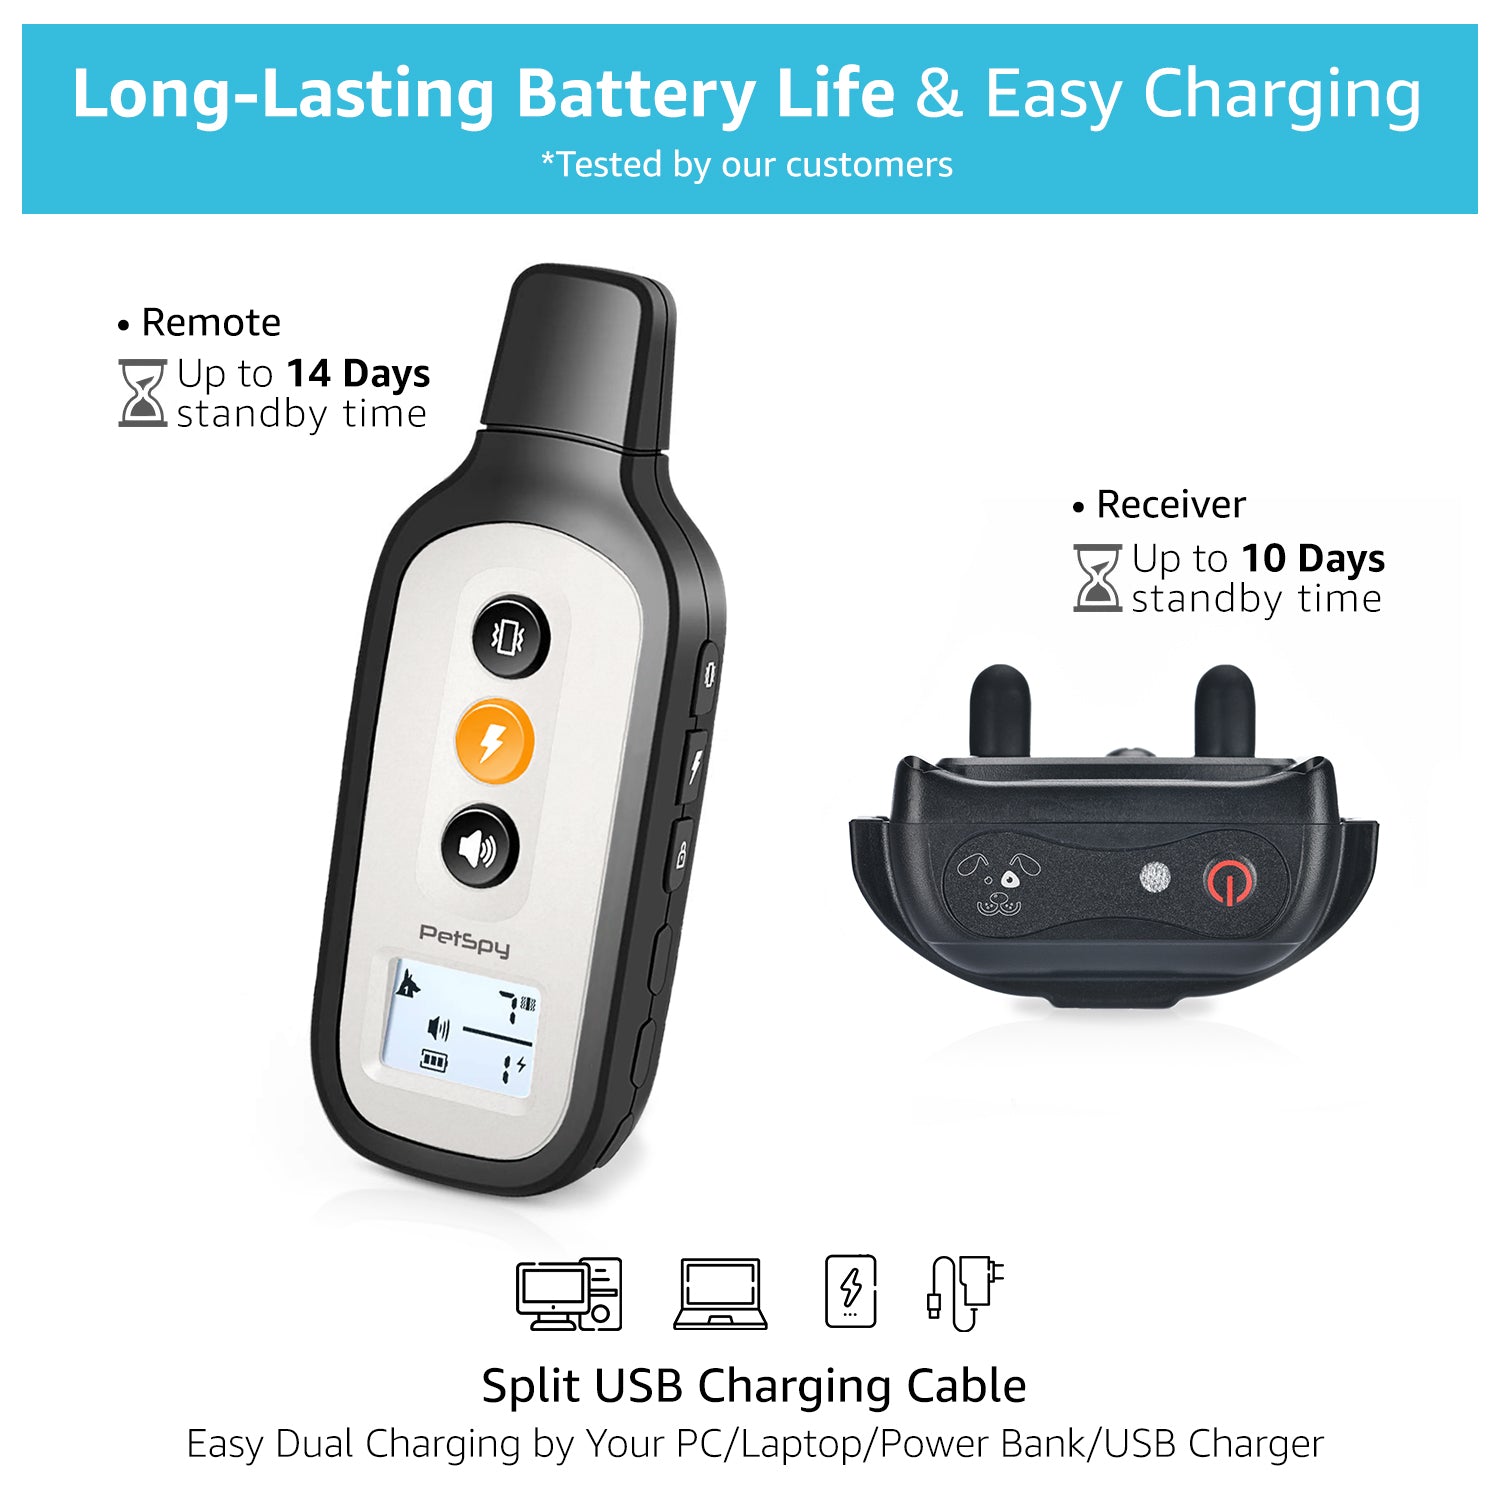 product has long-lasting battery and easy charging